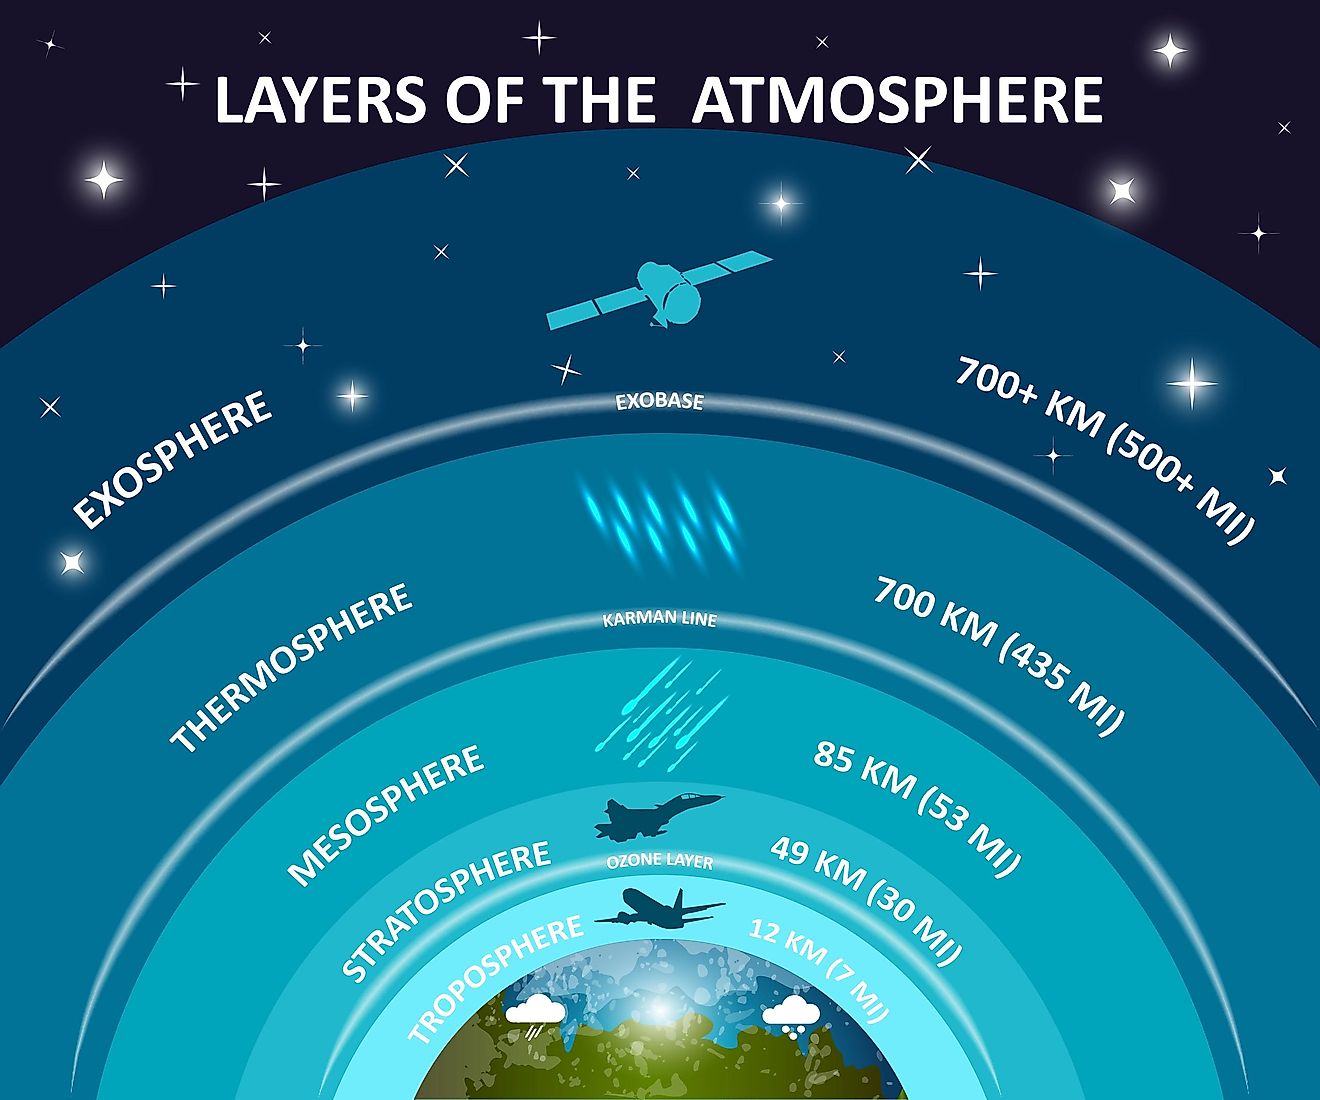 Atmospheric sciences study the Earth’s atmosphere and how it relates to other systems, mostly its relation with the environment.